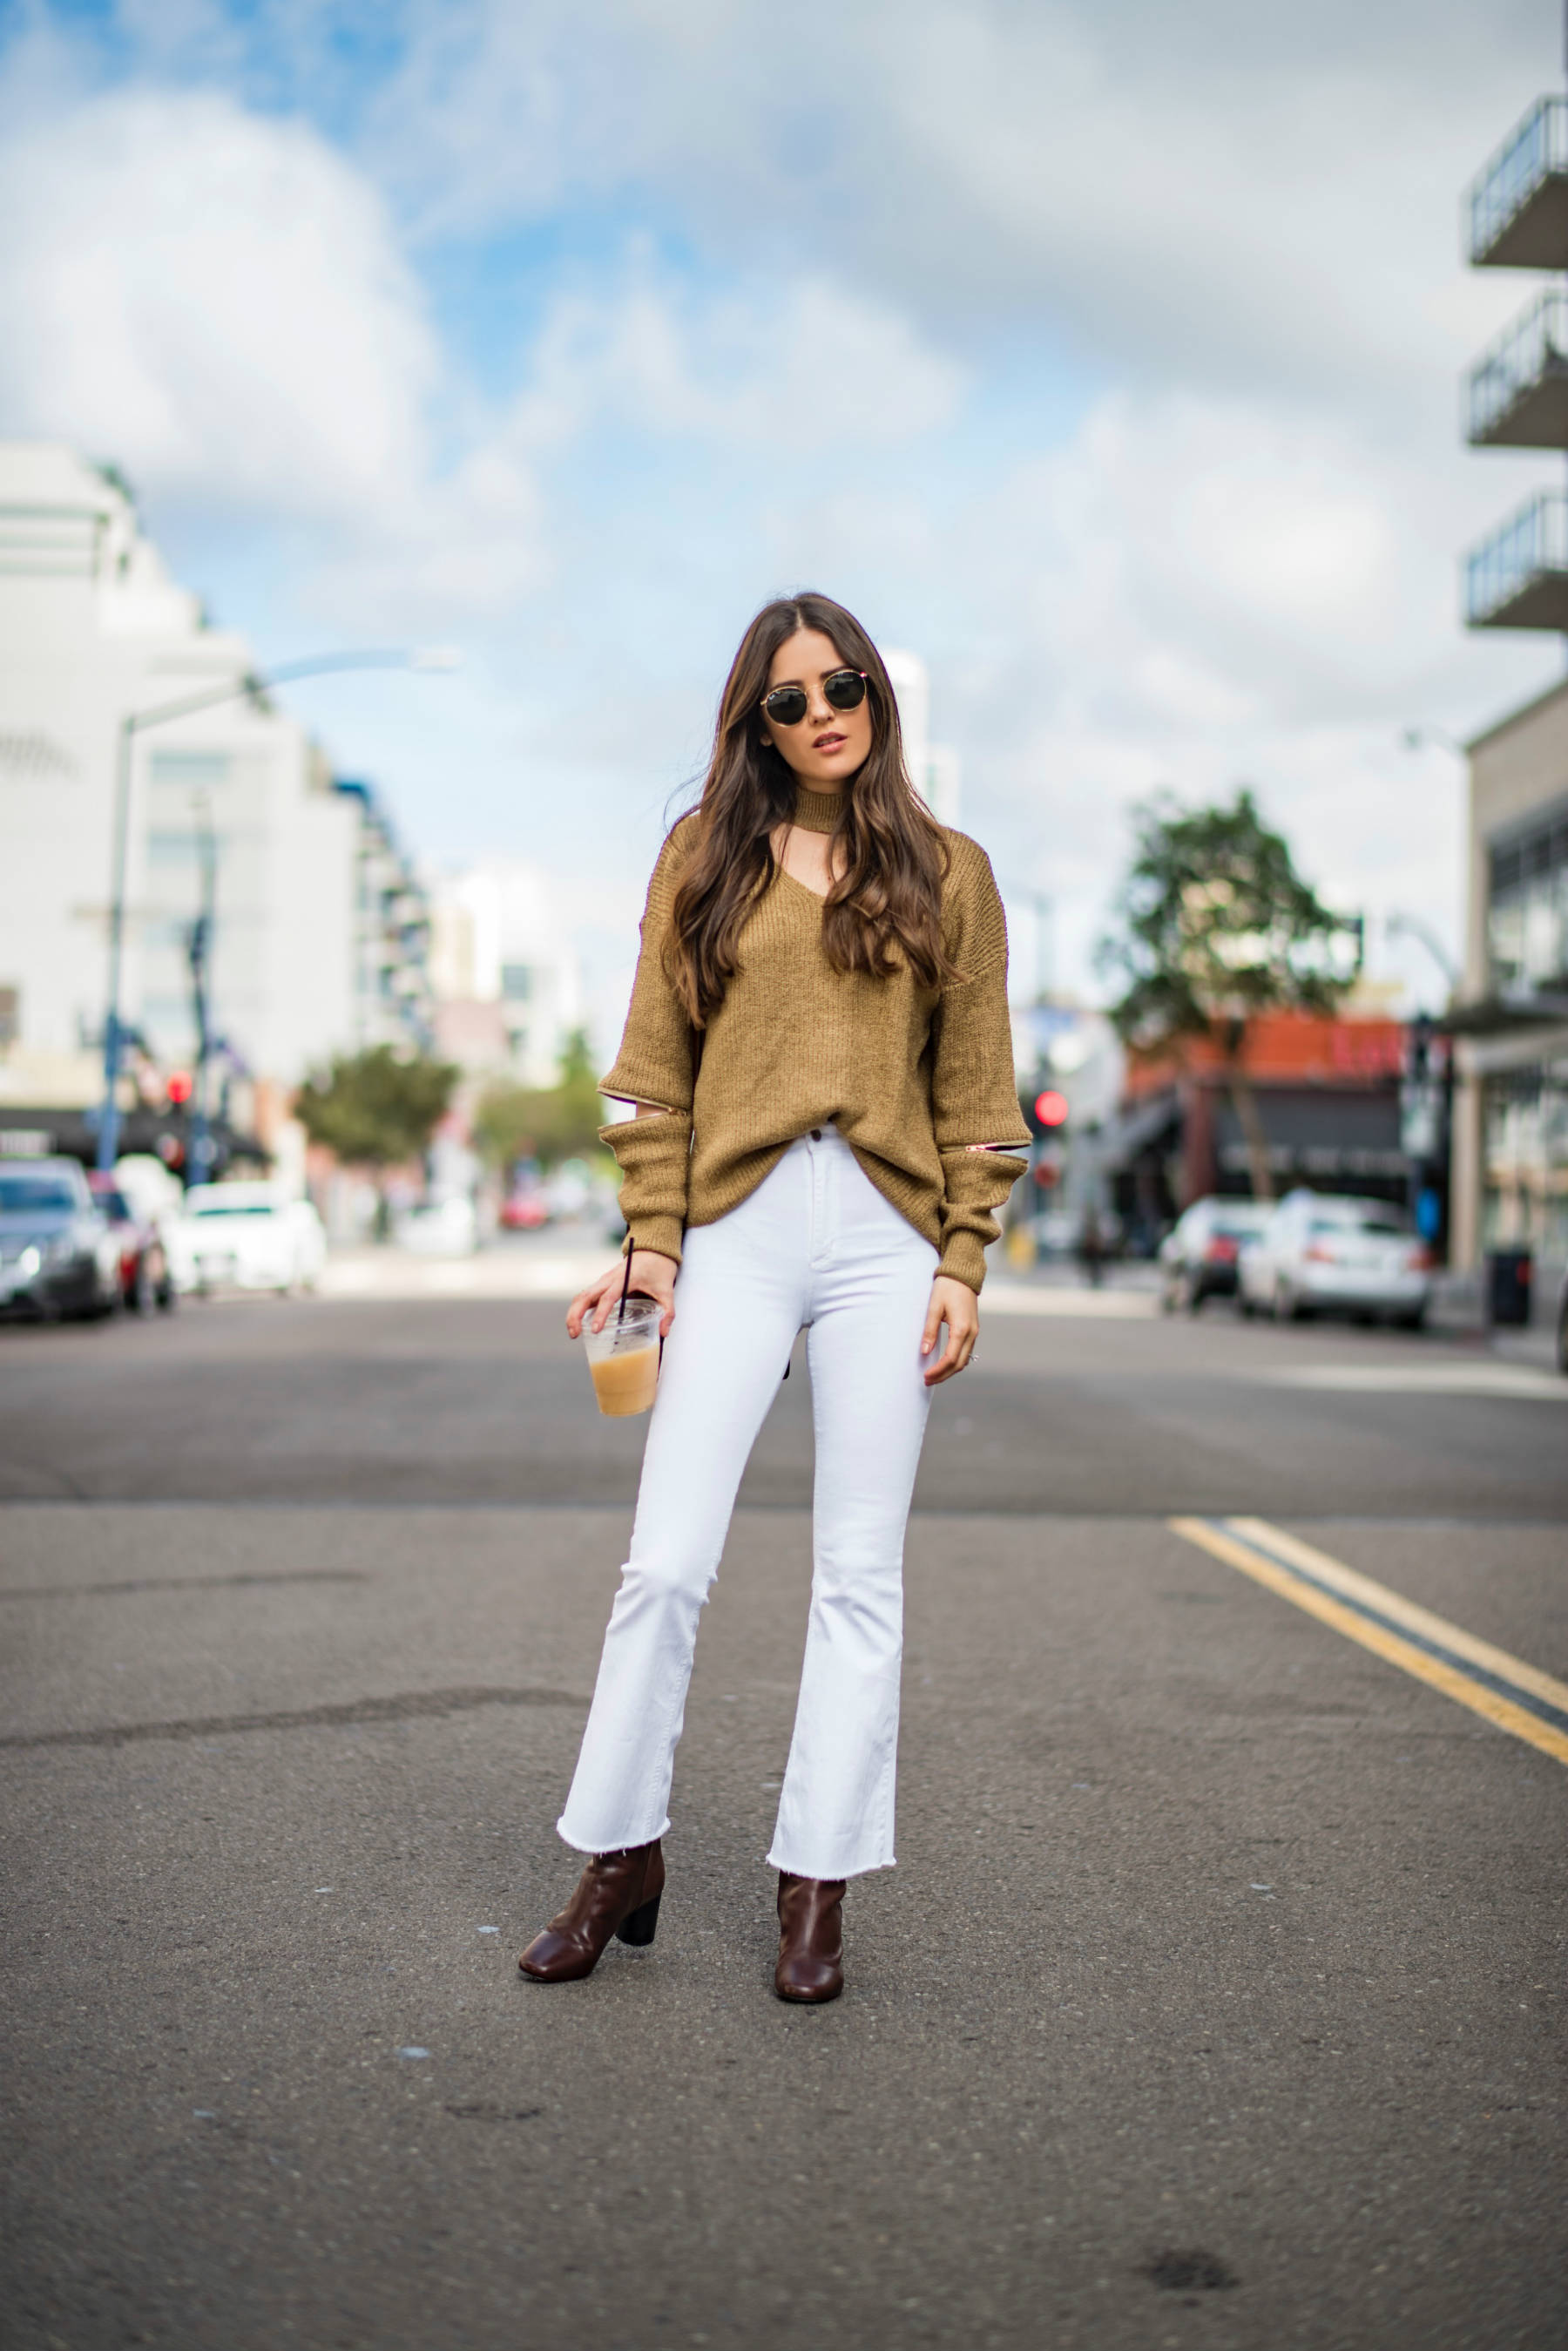 Blogger, Blank Itinerary posing for a photo in the middle of the street wearing white flare jeans and brown fall sweater.